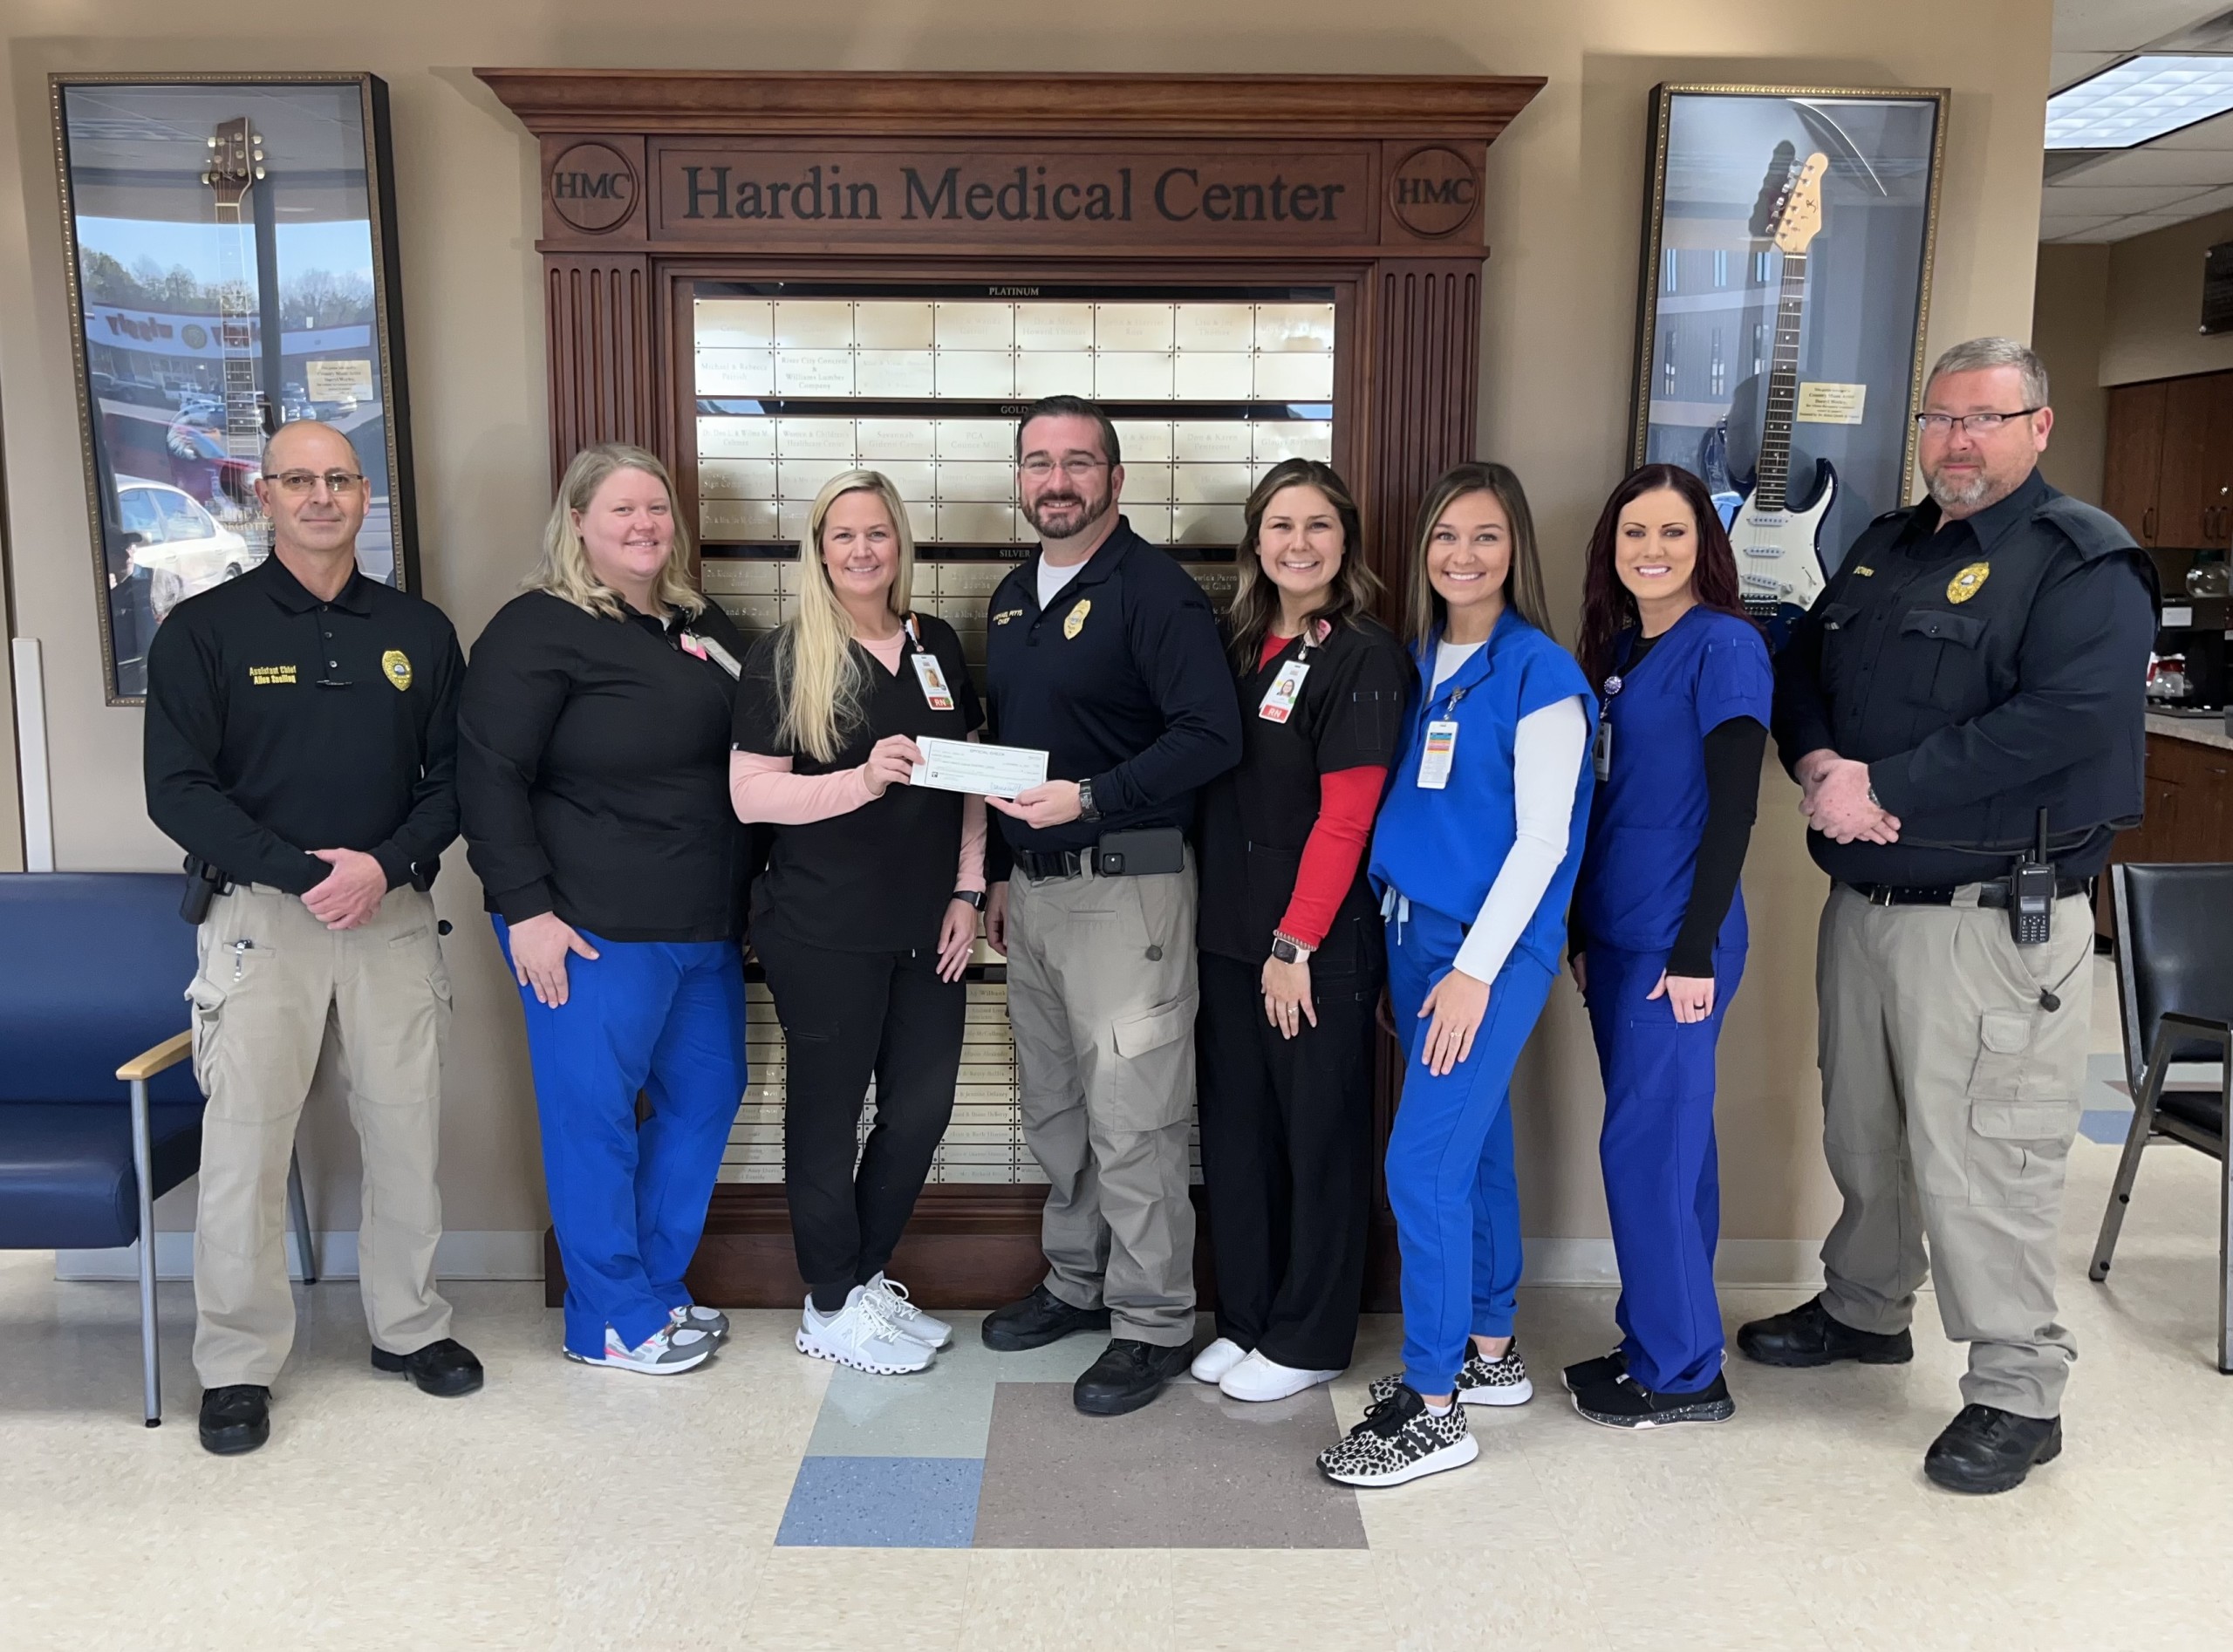 Police department presents check to cancer center - WBBJ TV